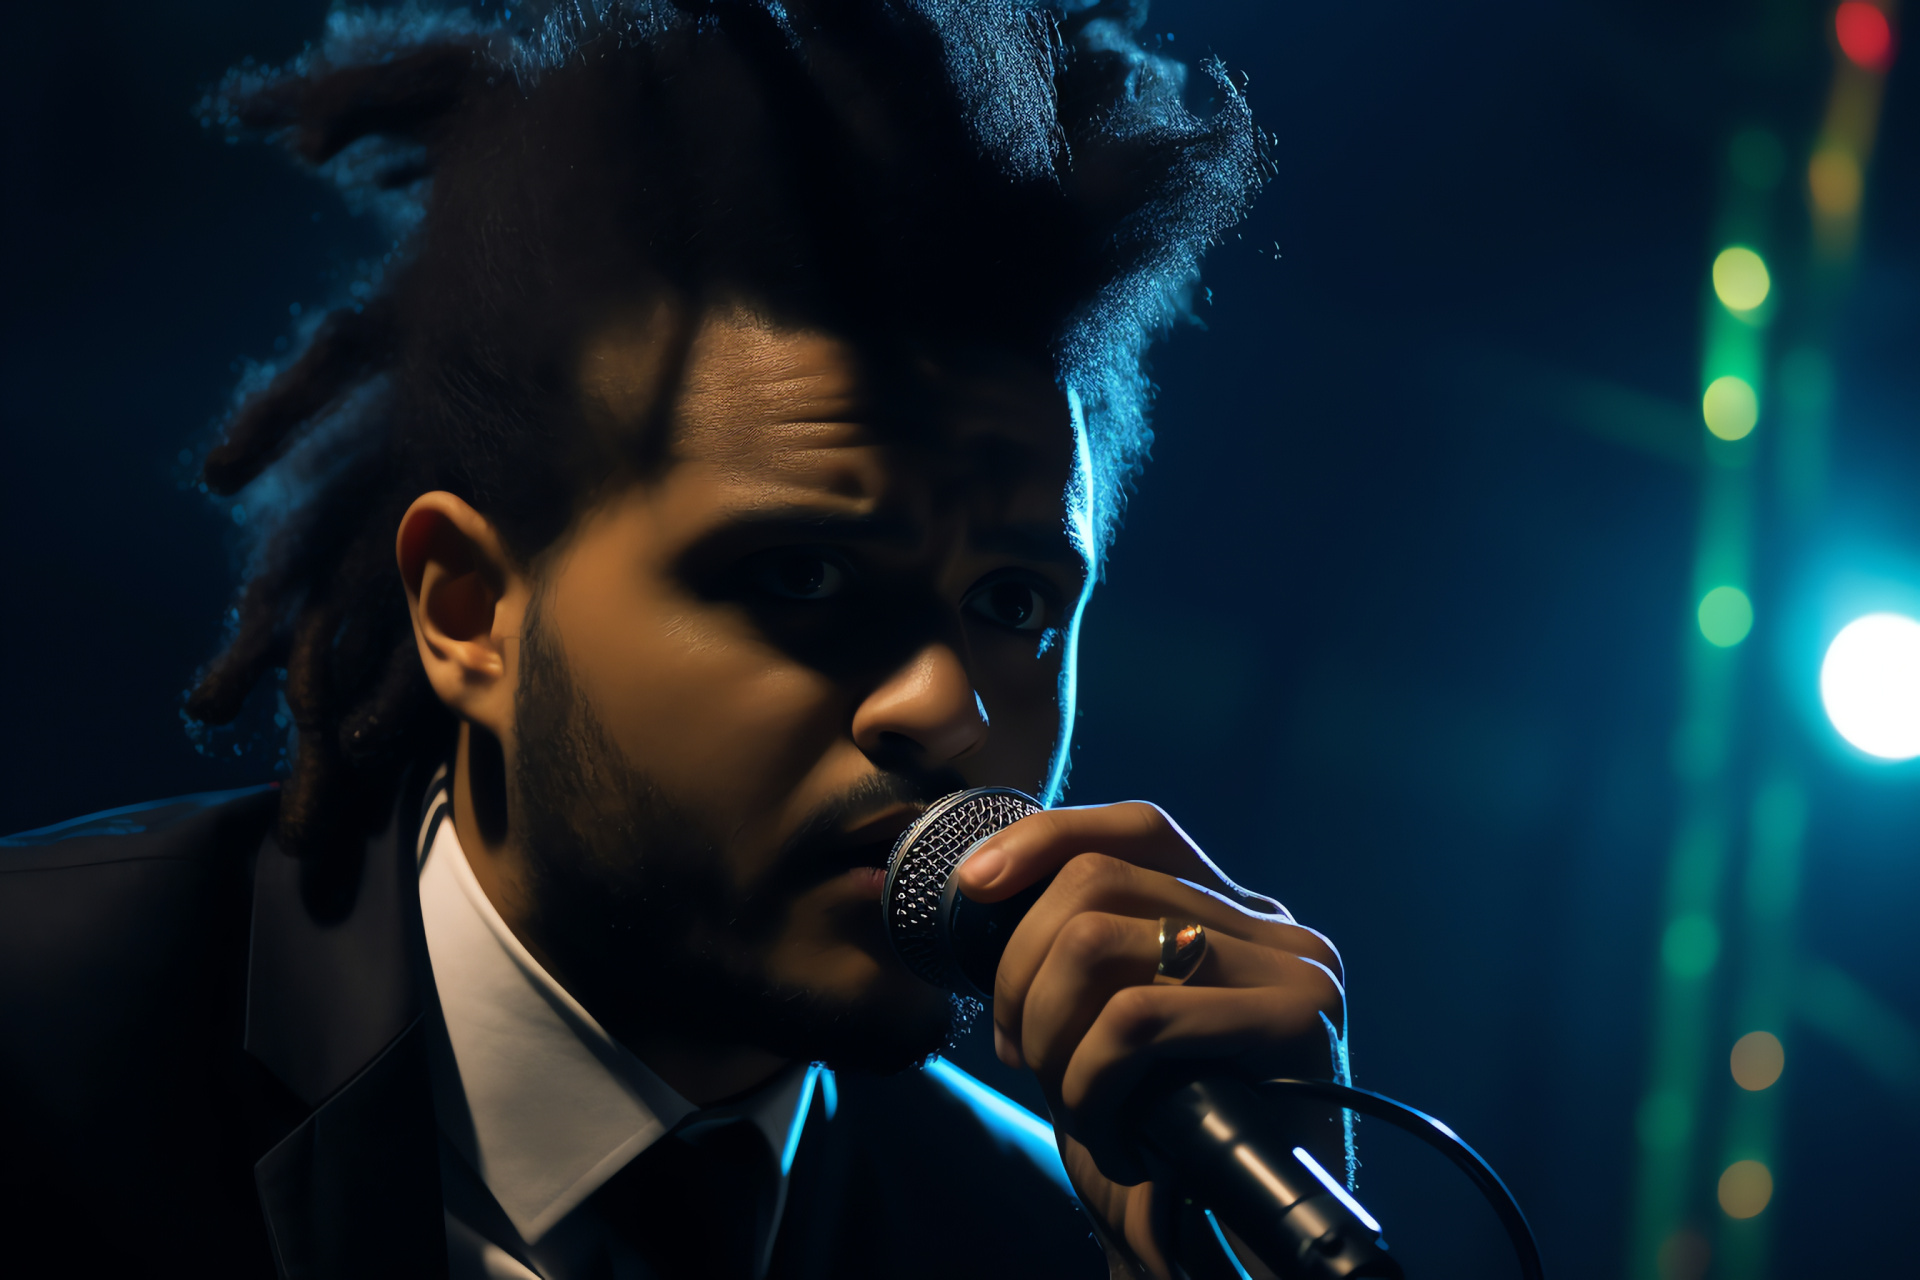 The Weeknd, Music world figure, Signature dreads, Concert suit, Singing with mic, HD Desktop Wallpaper